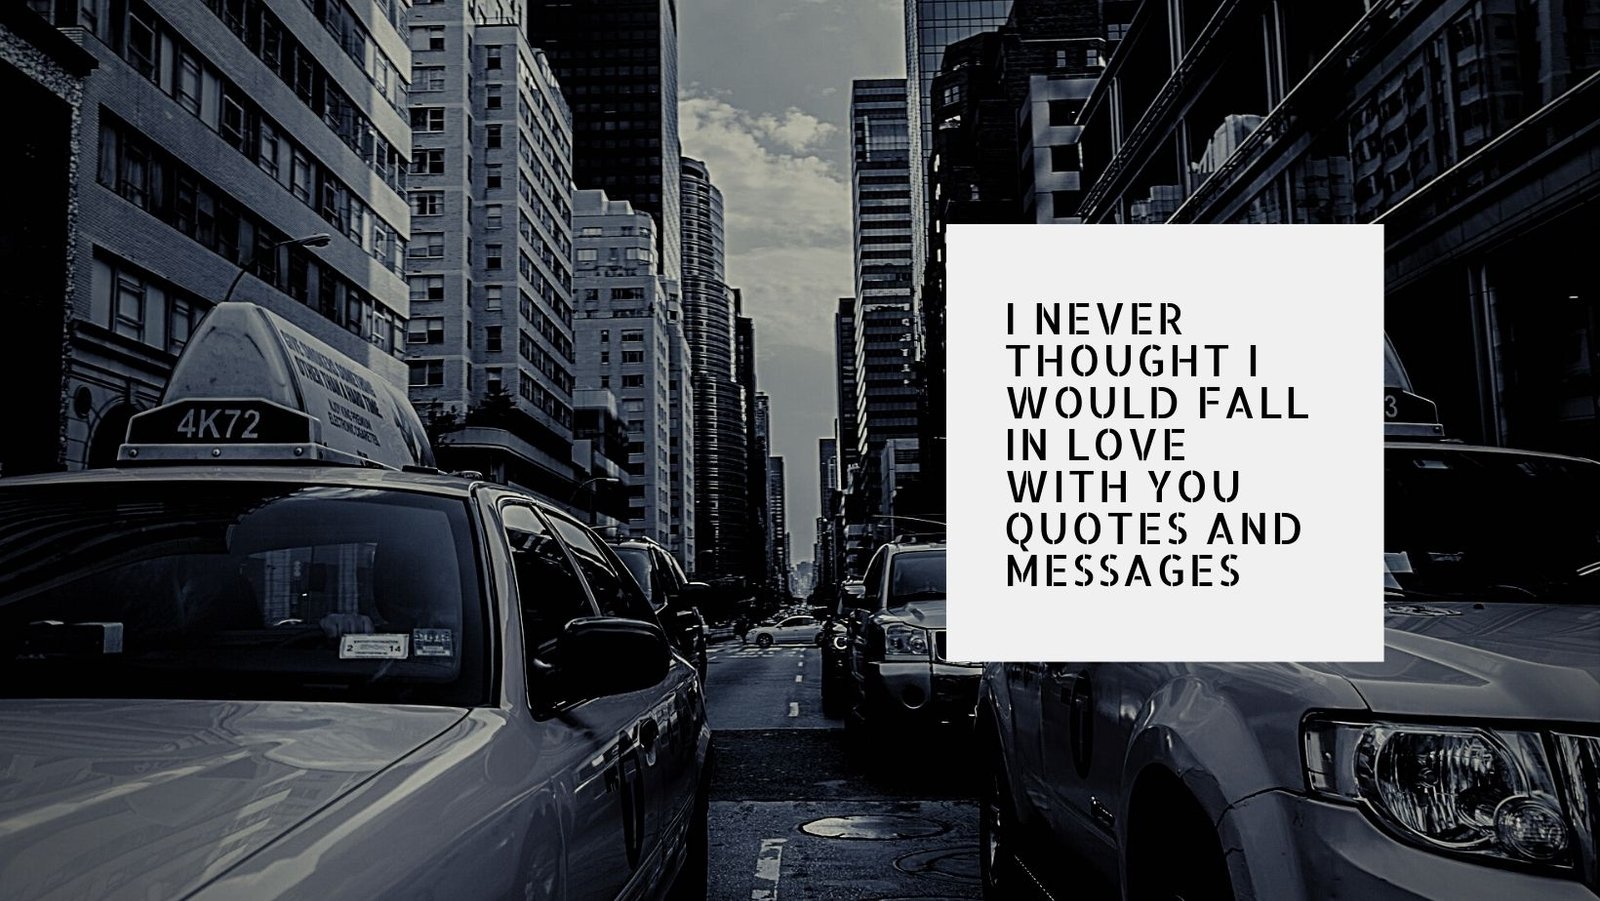 I Never Thought I Would Fall in Love with You Quotes and Messages